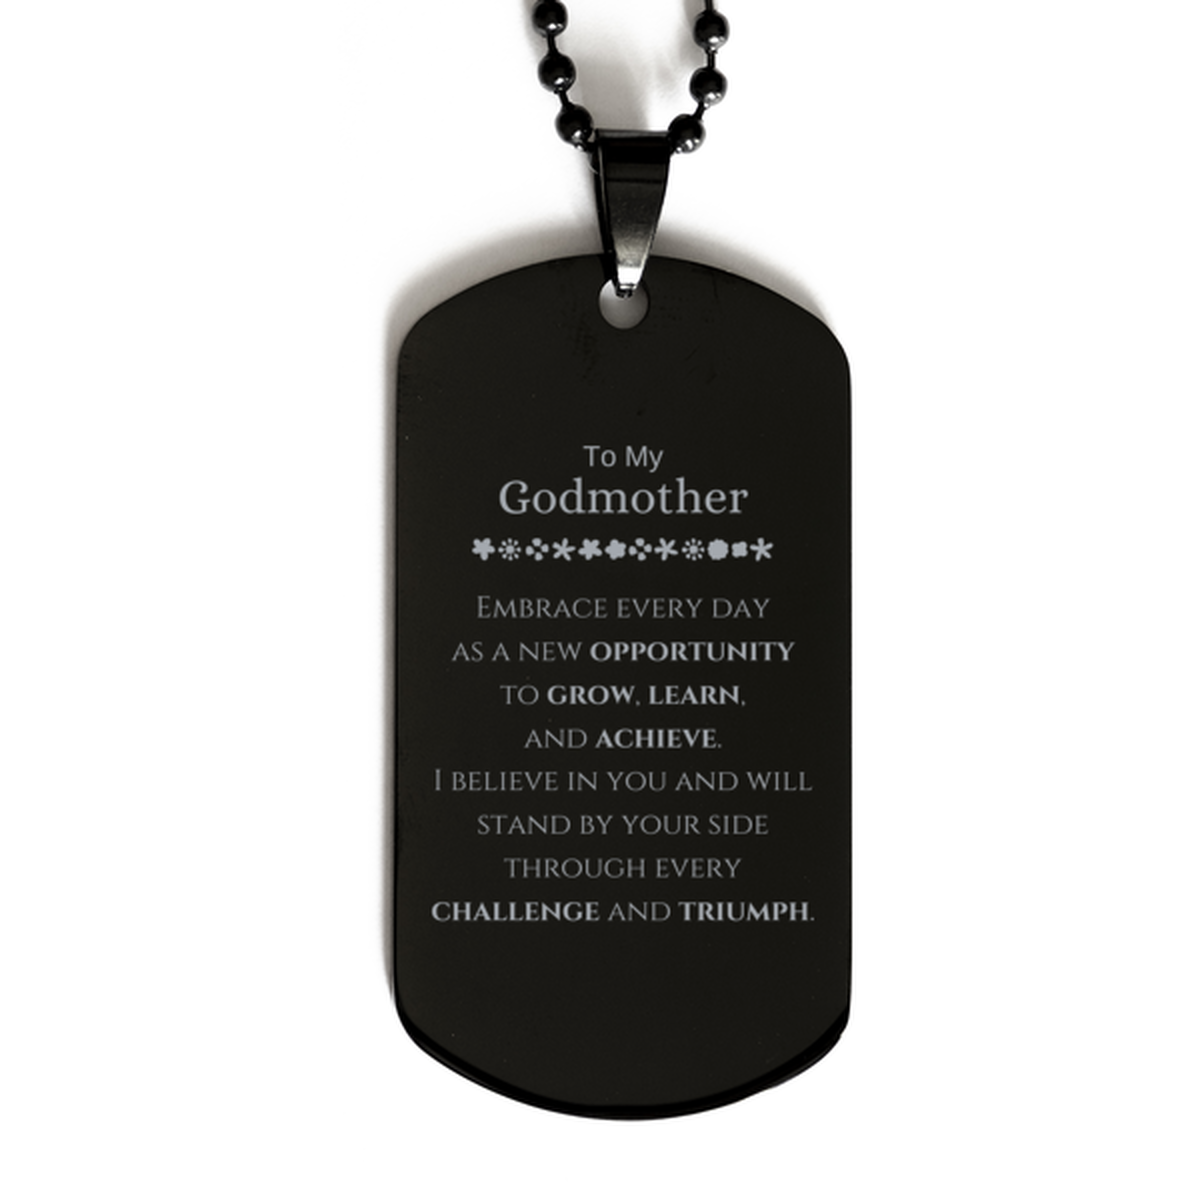 To My Godmother Gifts, I believe in you and will stand by your side, Inspirational Black Dog Tag For Godmother, Birthday Christmas Motivational Godmother Gifts